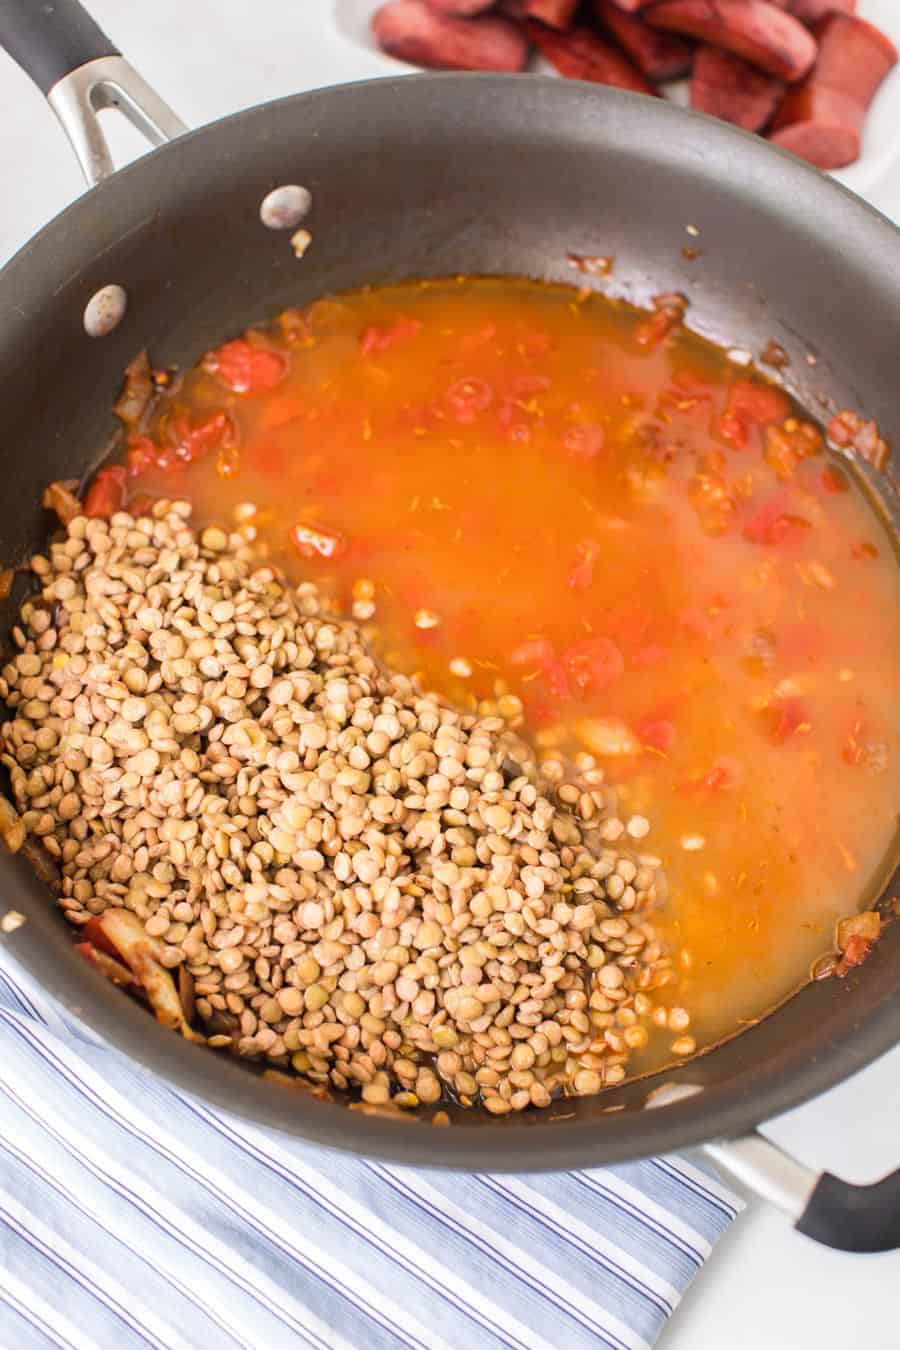 lentils and a tomato and spicy looking sauce in a pan.